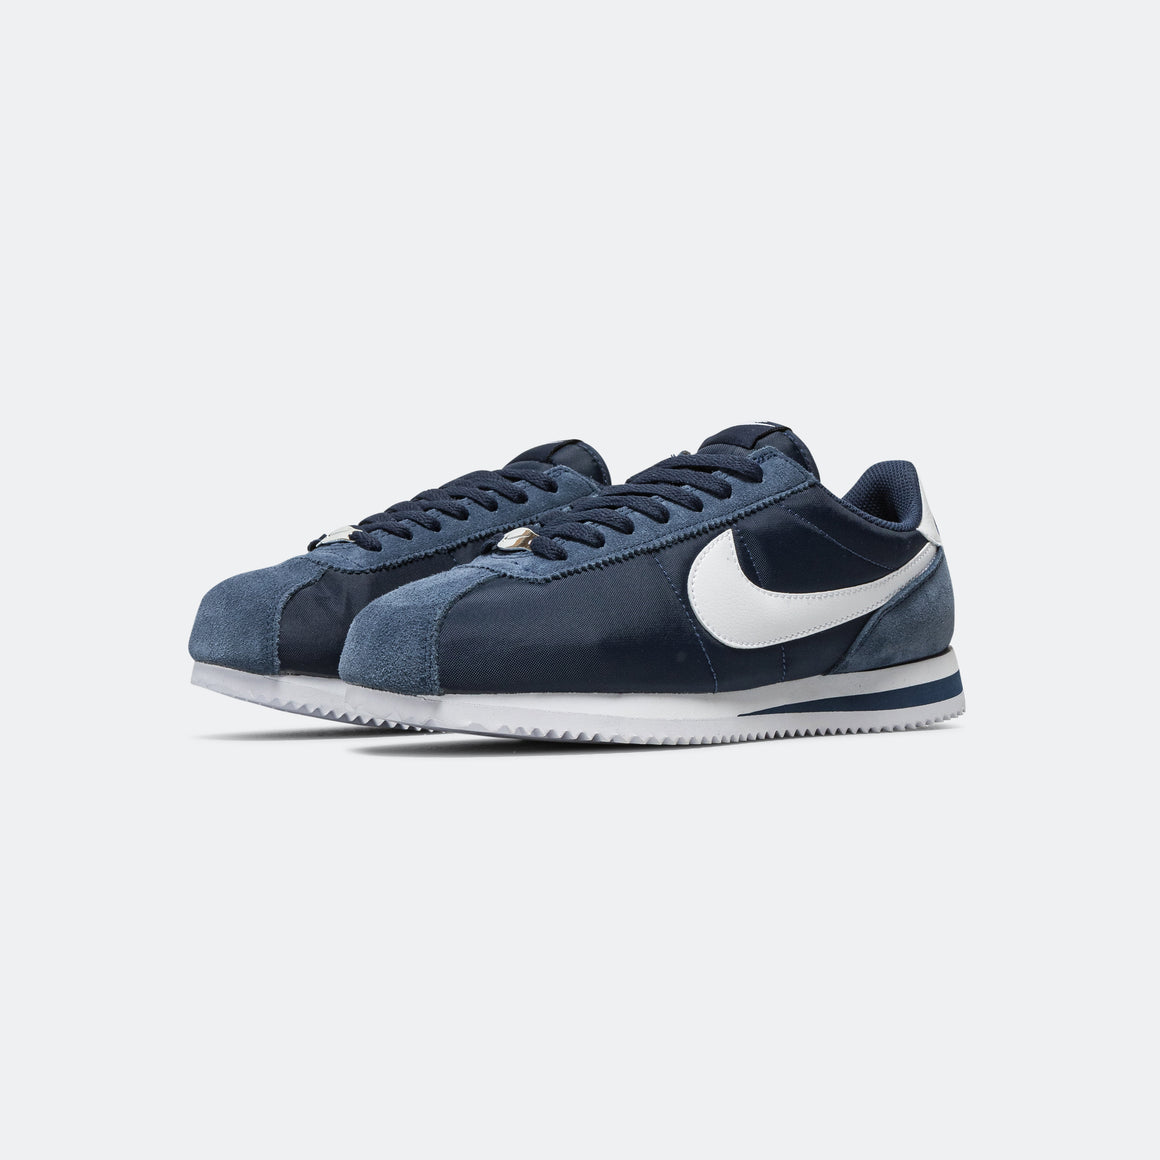 Nike - Womens Cortez - Midnight Navy/White - UP THERE